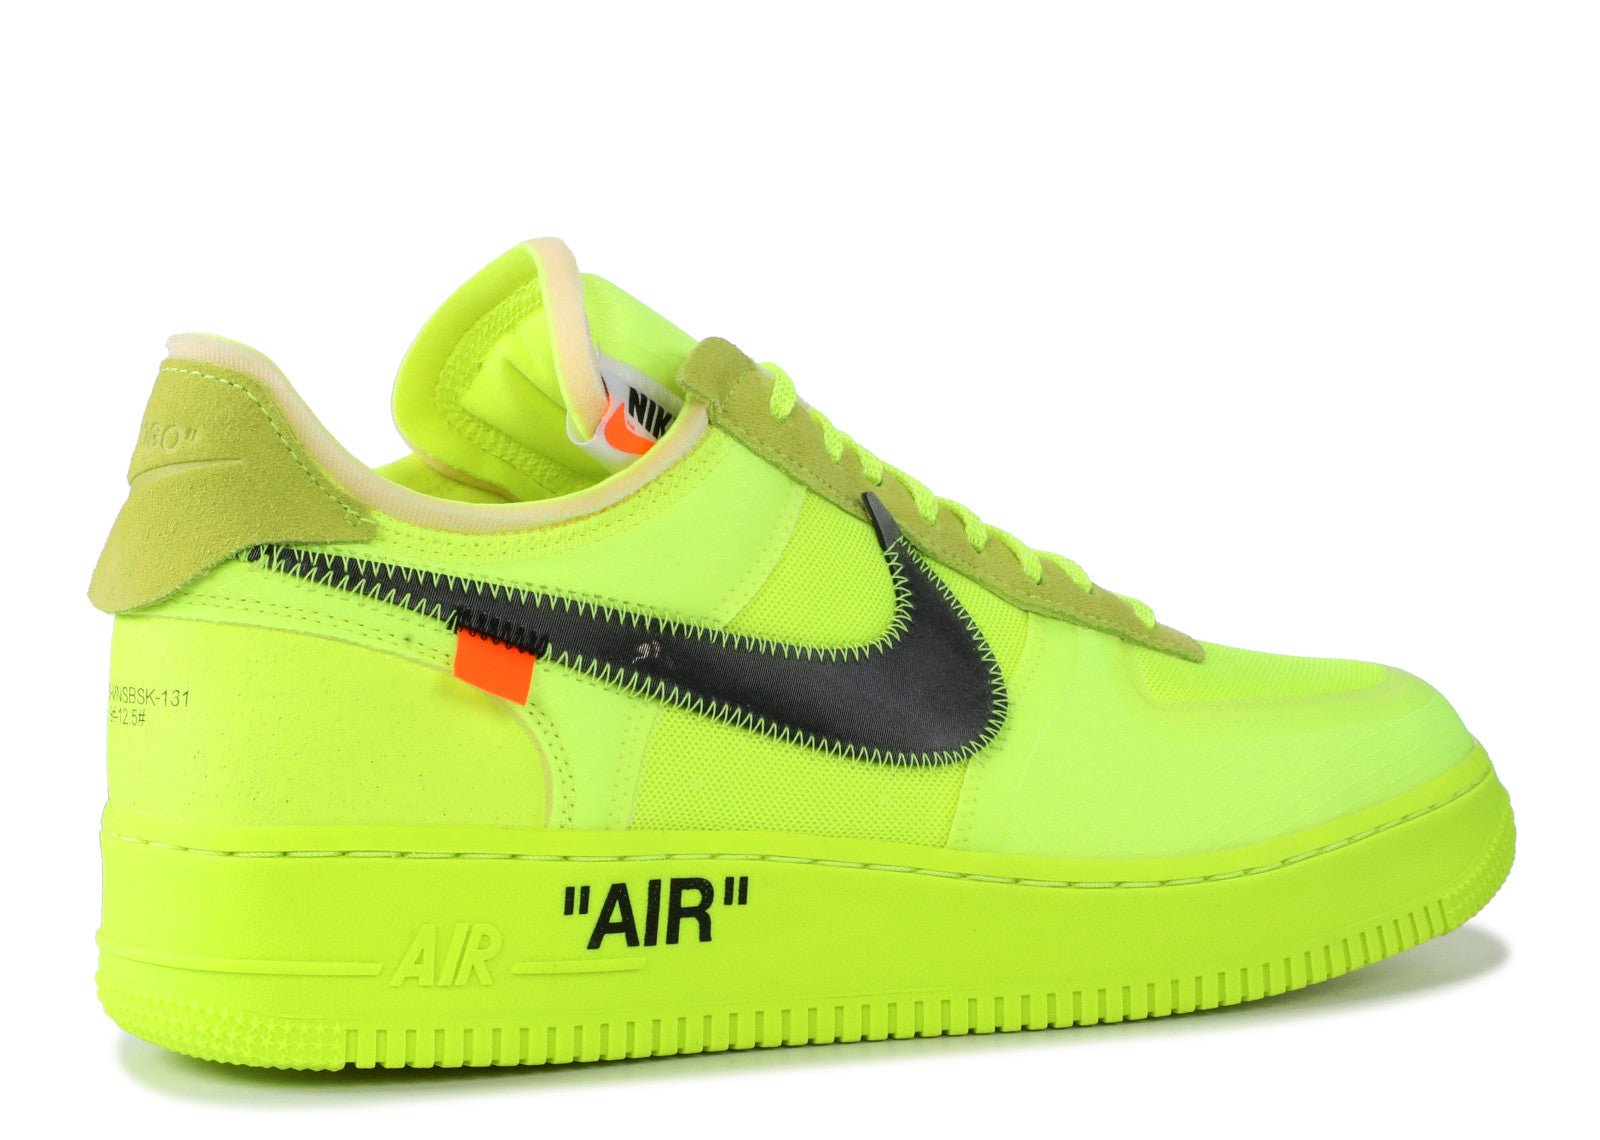 CONSIGNMENT OFF-WHITE X NIKE AIR FORCE 1 LOW 'VOLT' - Golden Kicks Mx